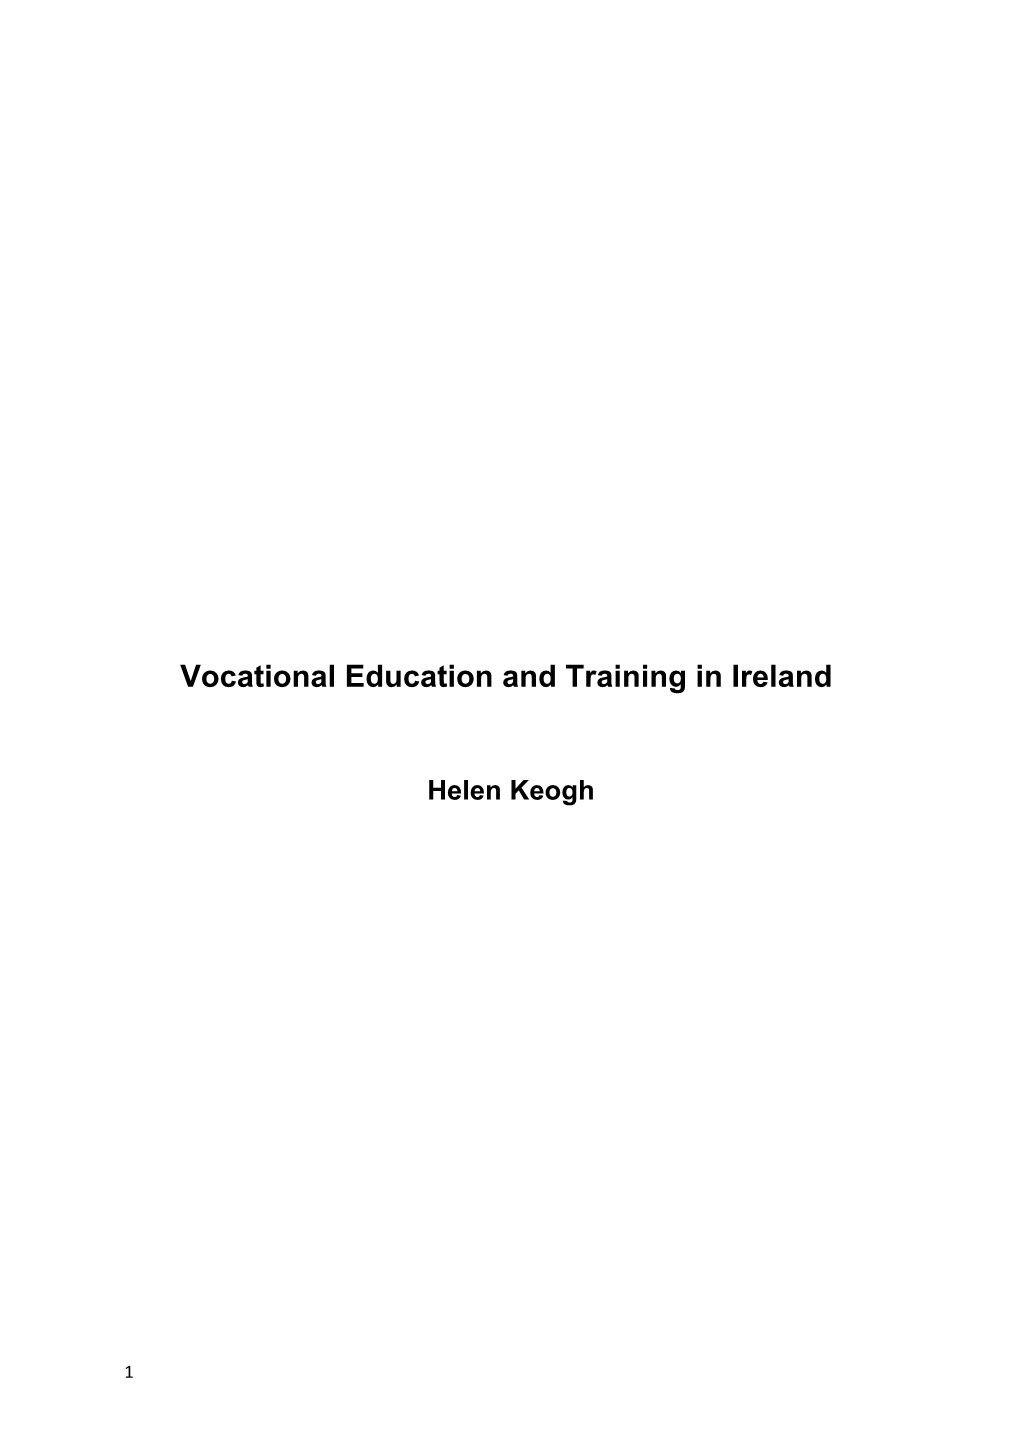 Vocational Education and Training in Ireland